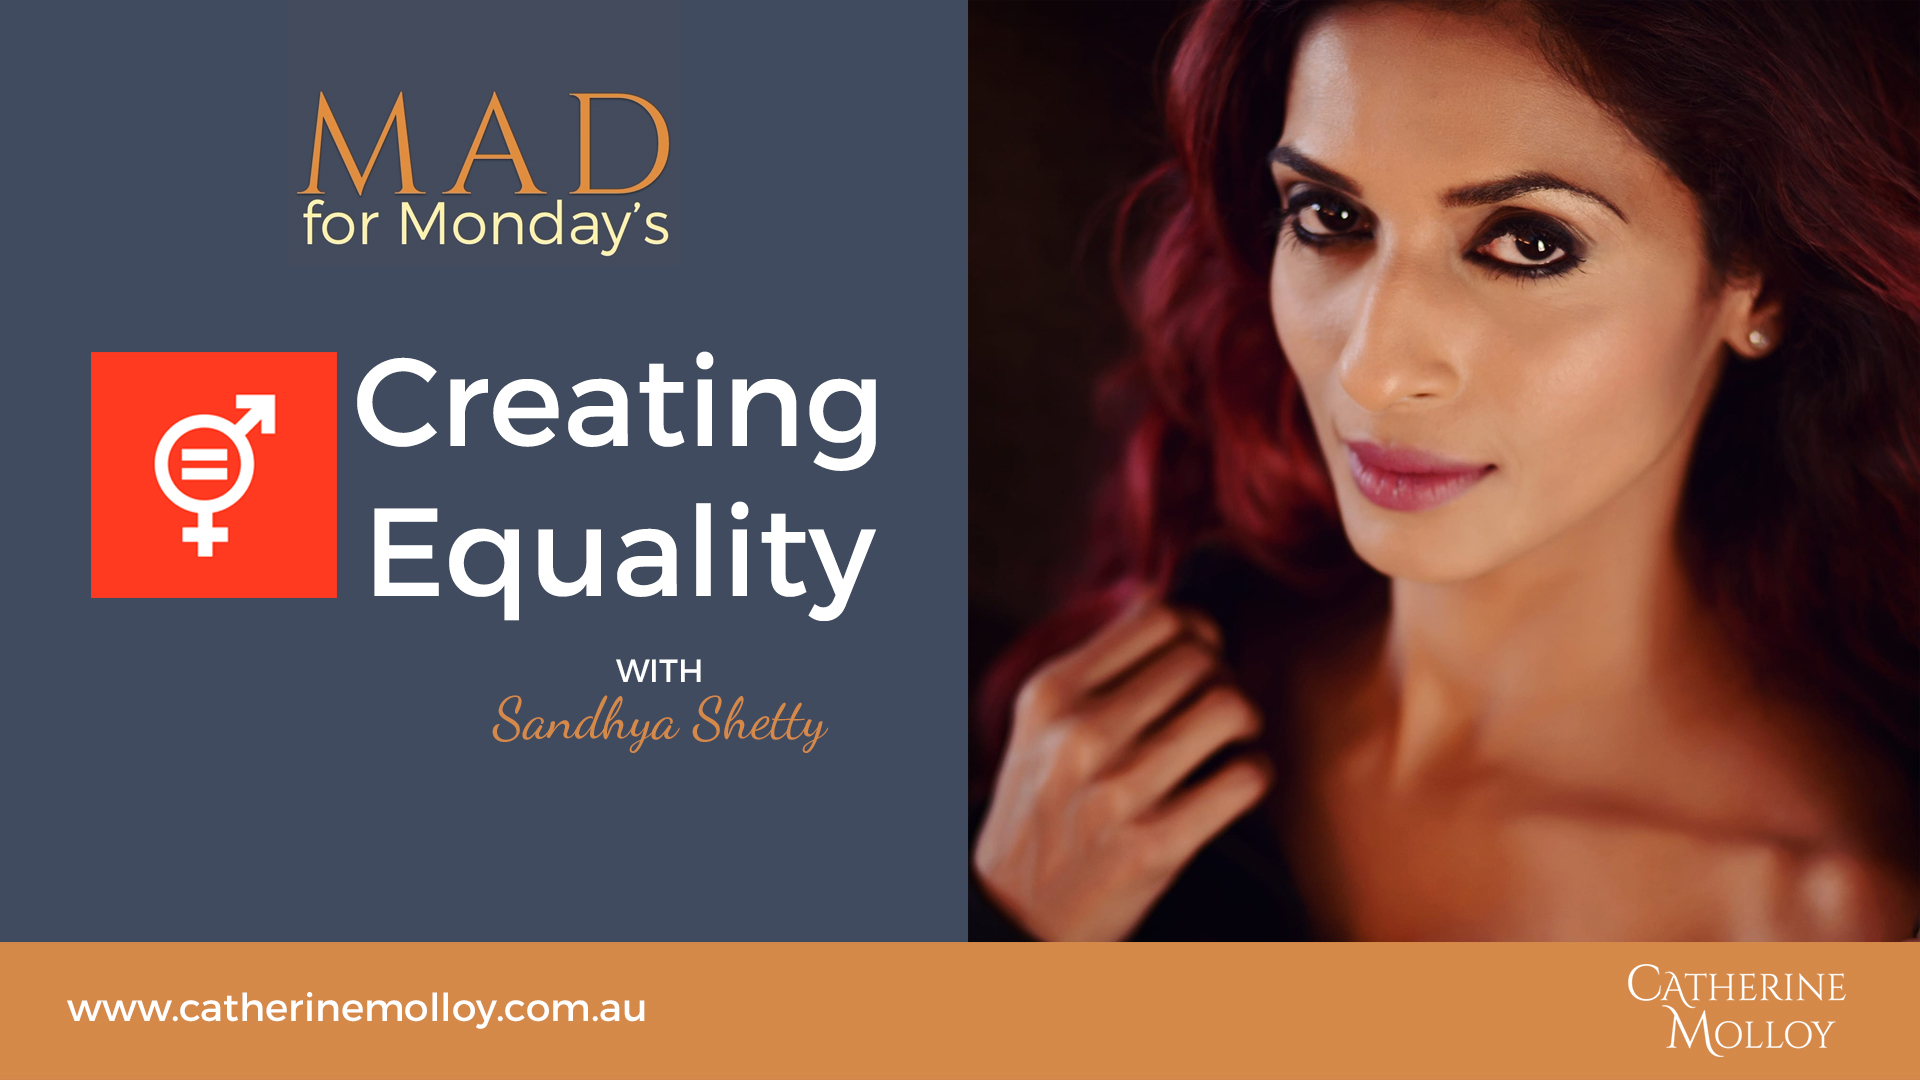 MAD for Monday’s – Creating Equality